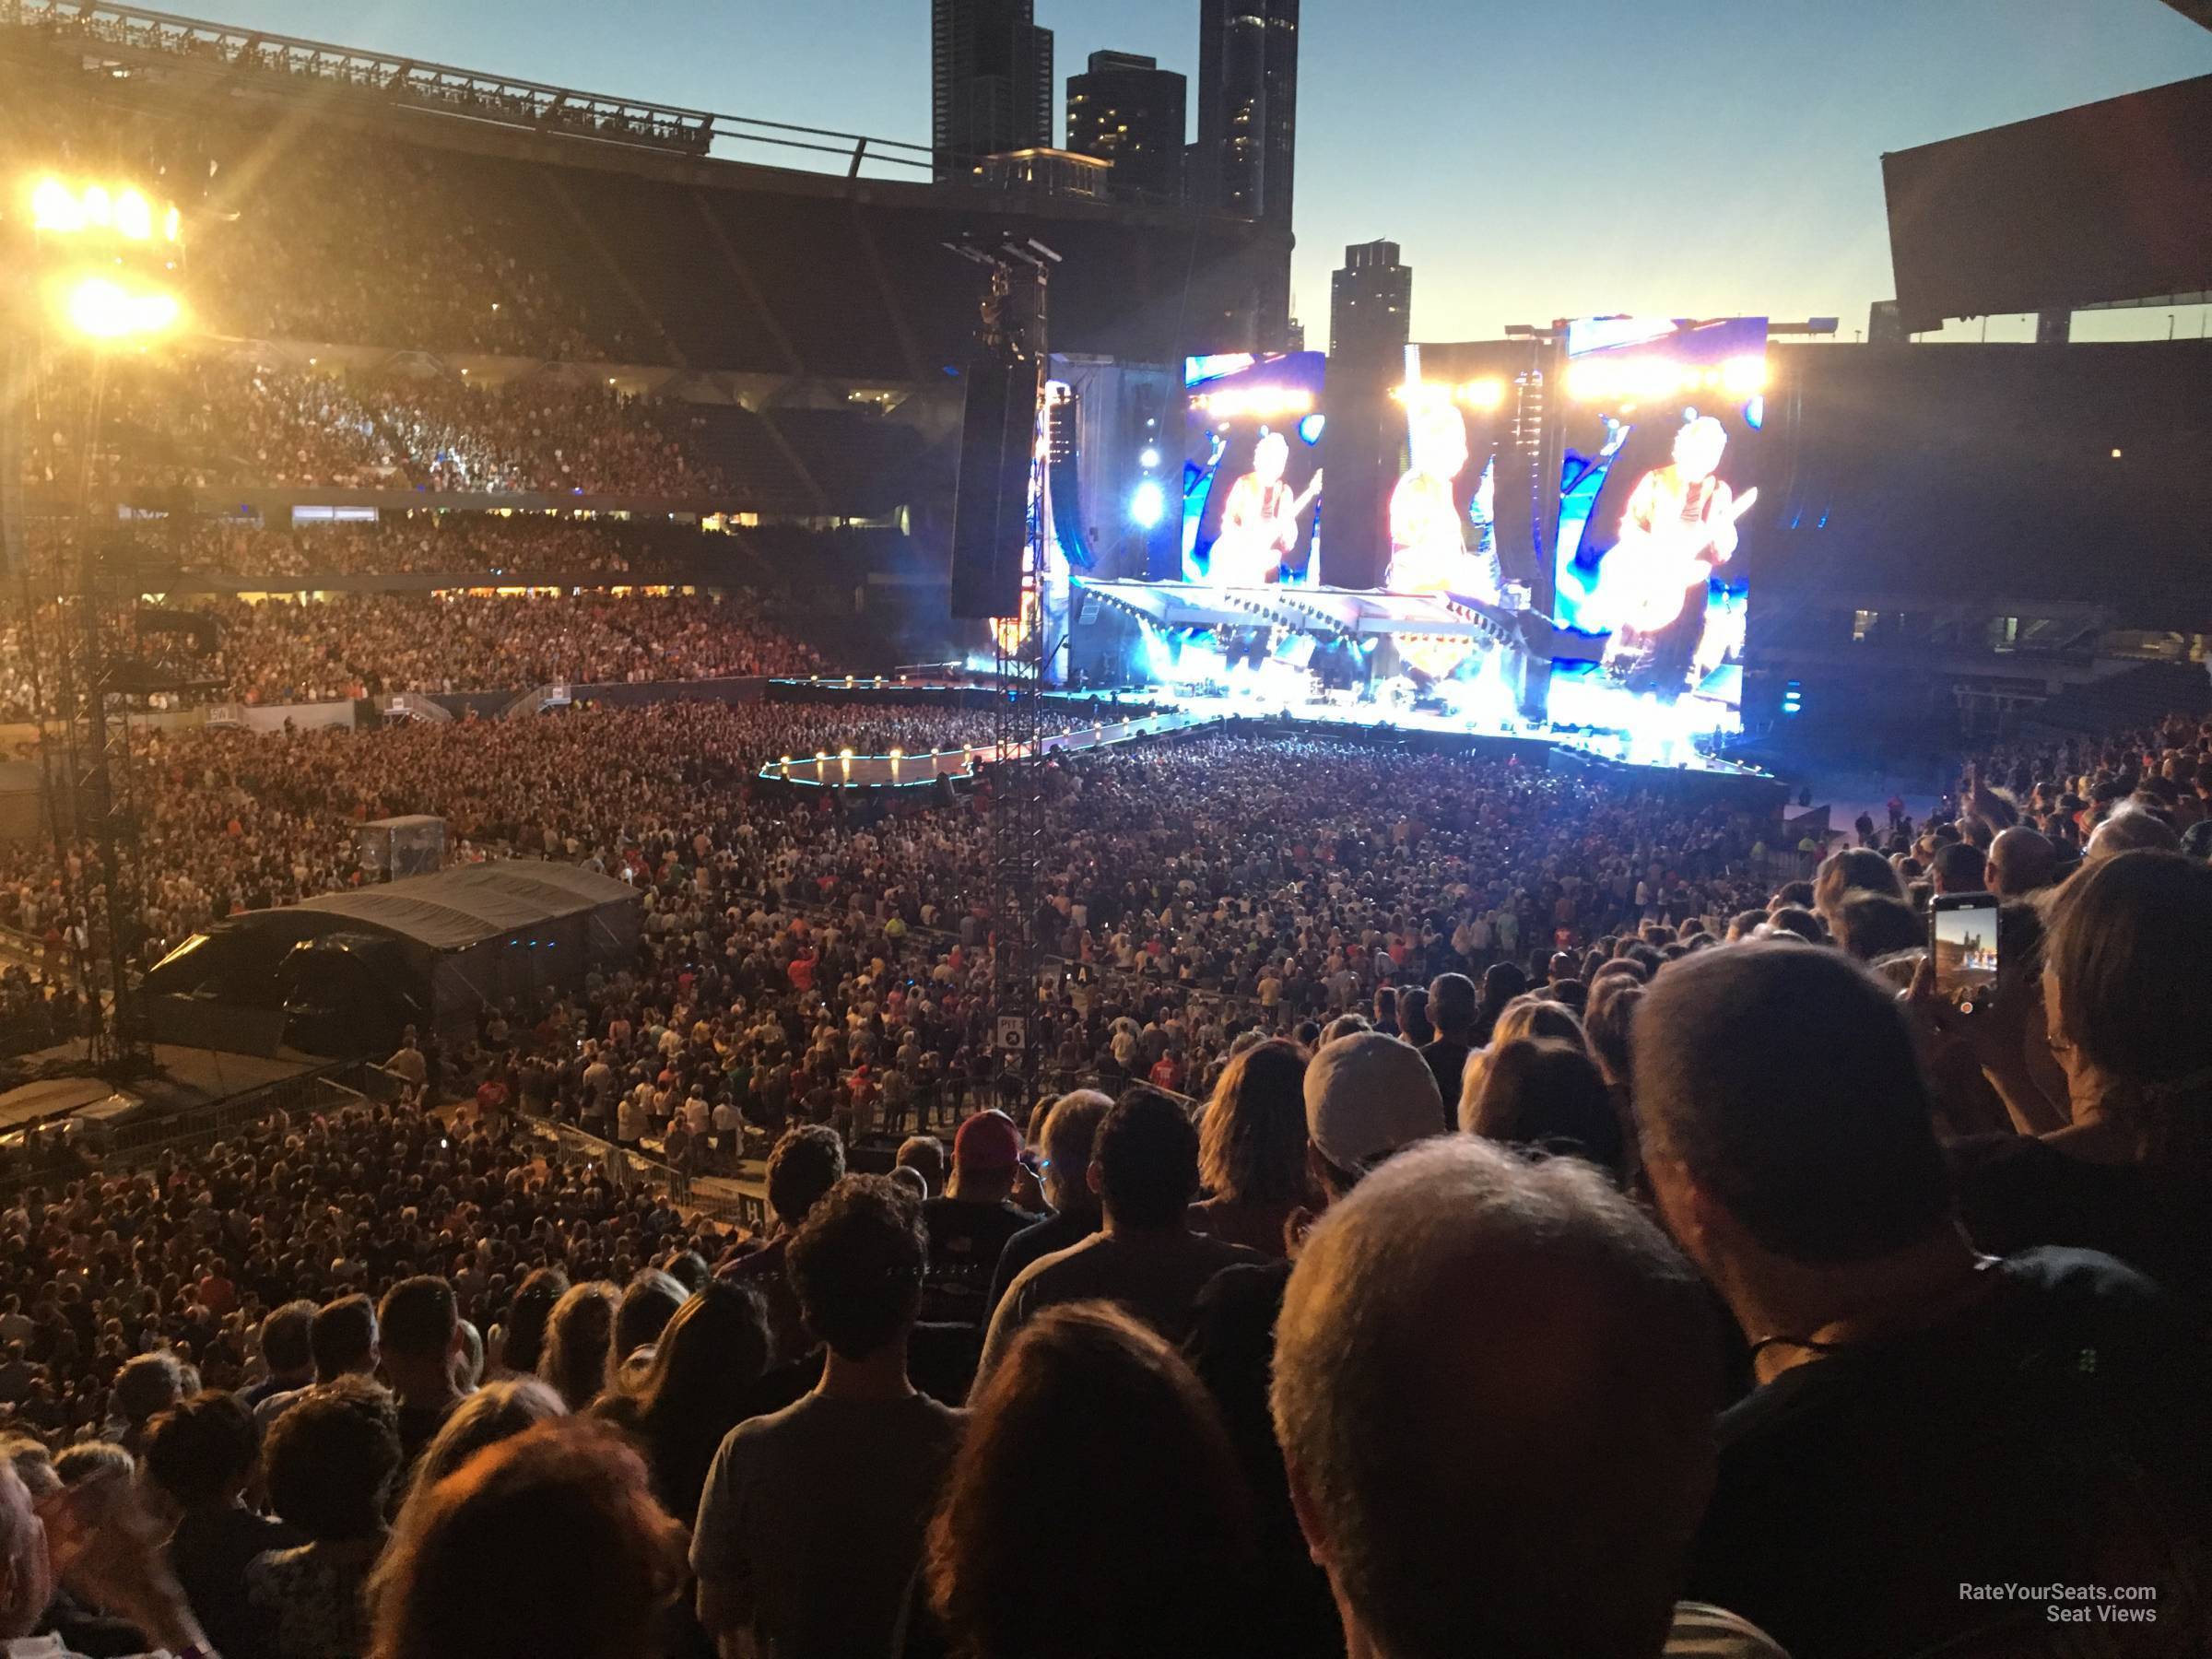 section 213, row 10 seat view  for concert - soldier field